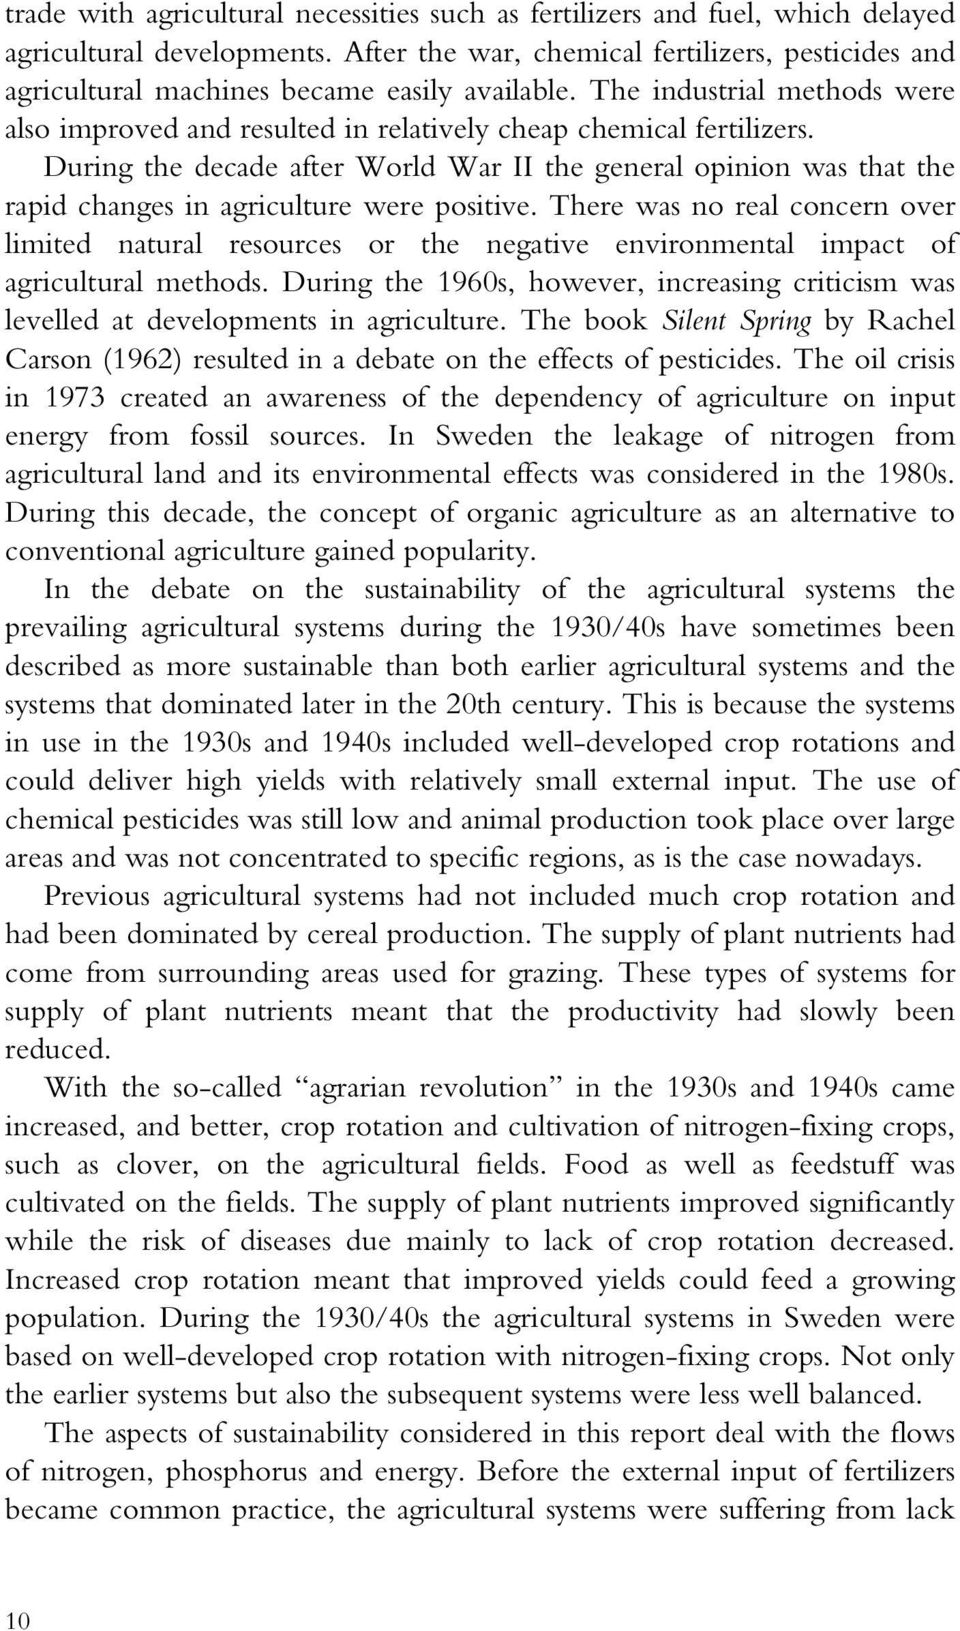 During the decade after World War II the general opinion was that the rapid changes in agriculture were positive.